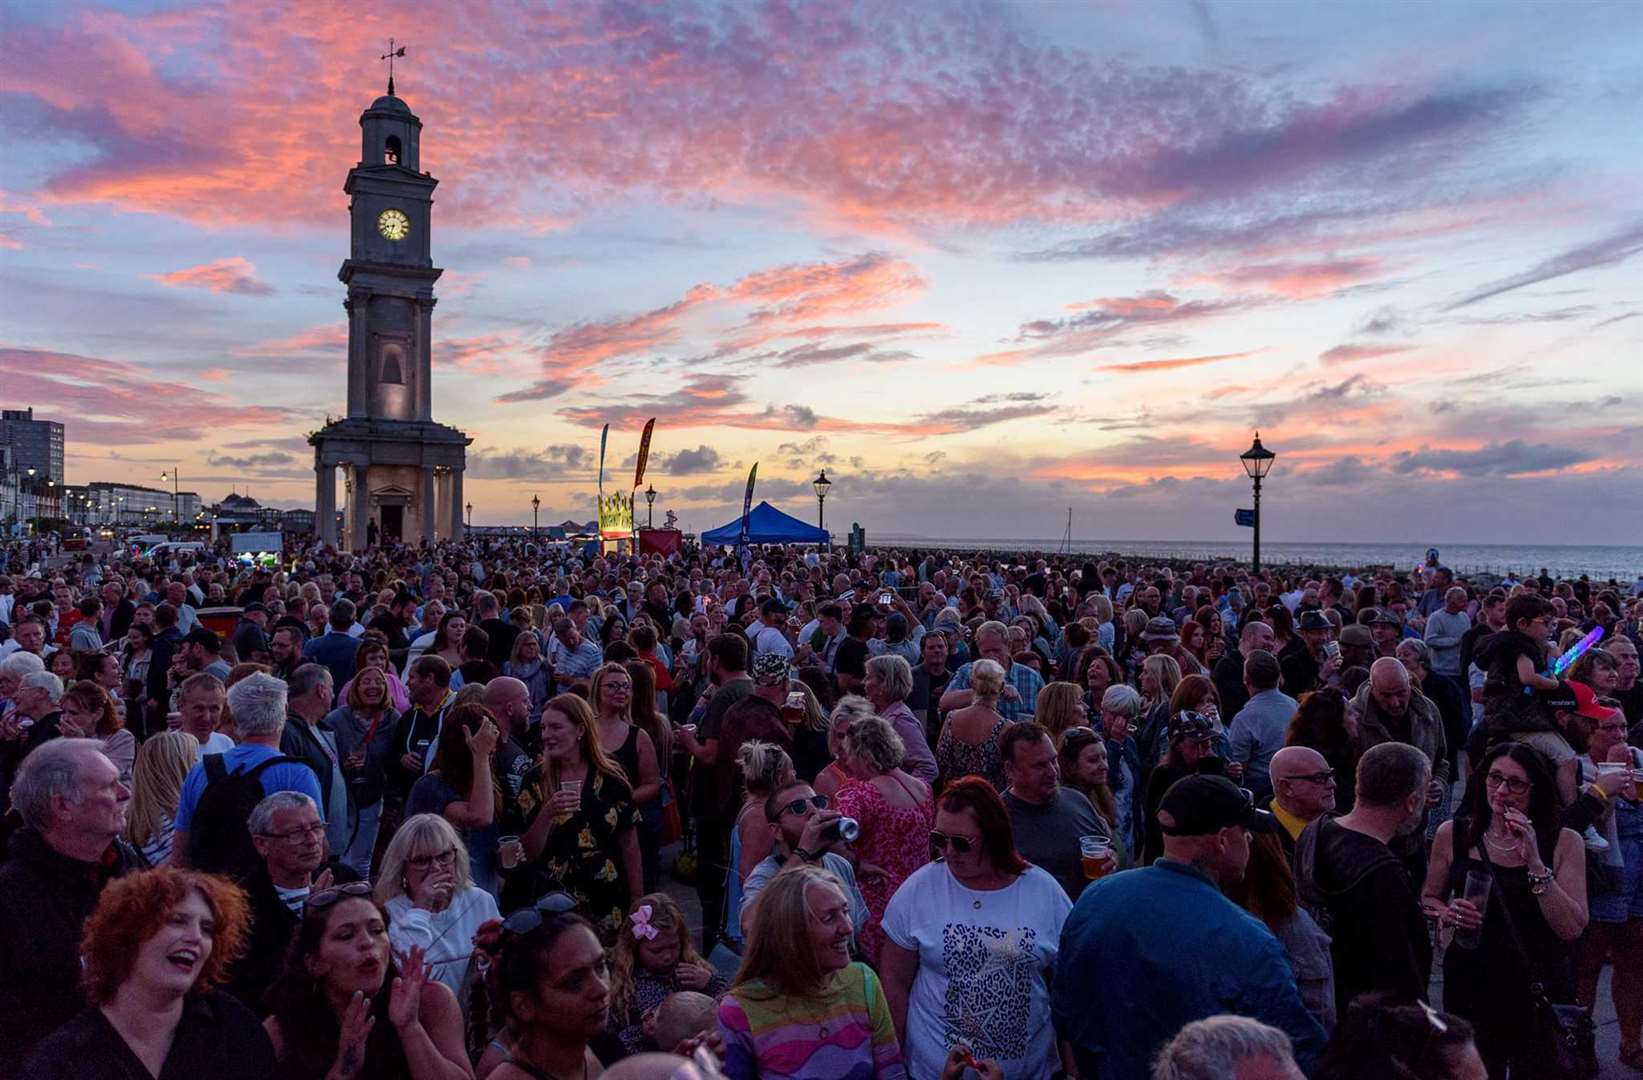 Crowds of people at the Herne Bay Carnival yesterday evening. Photo: Andy Birkett